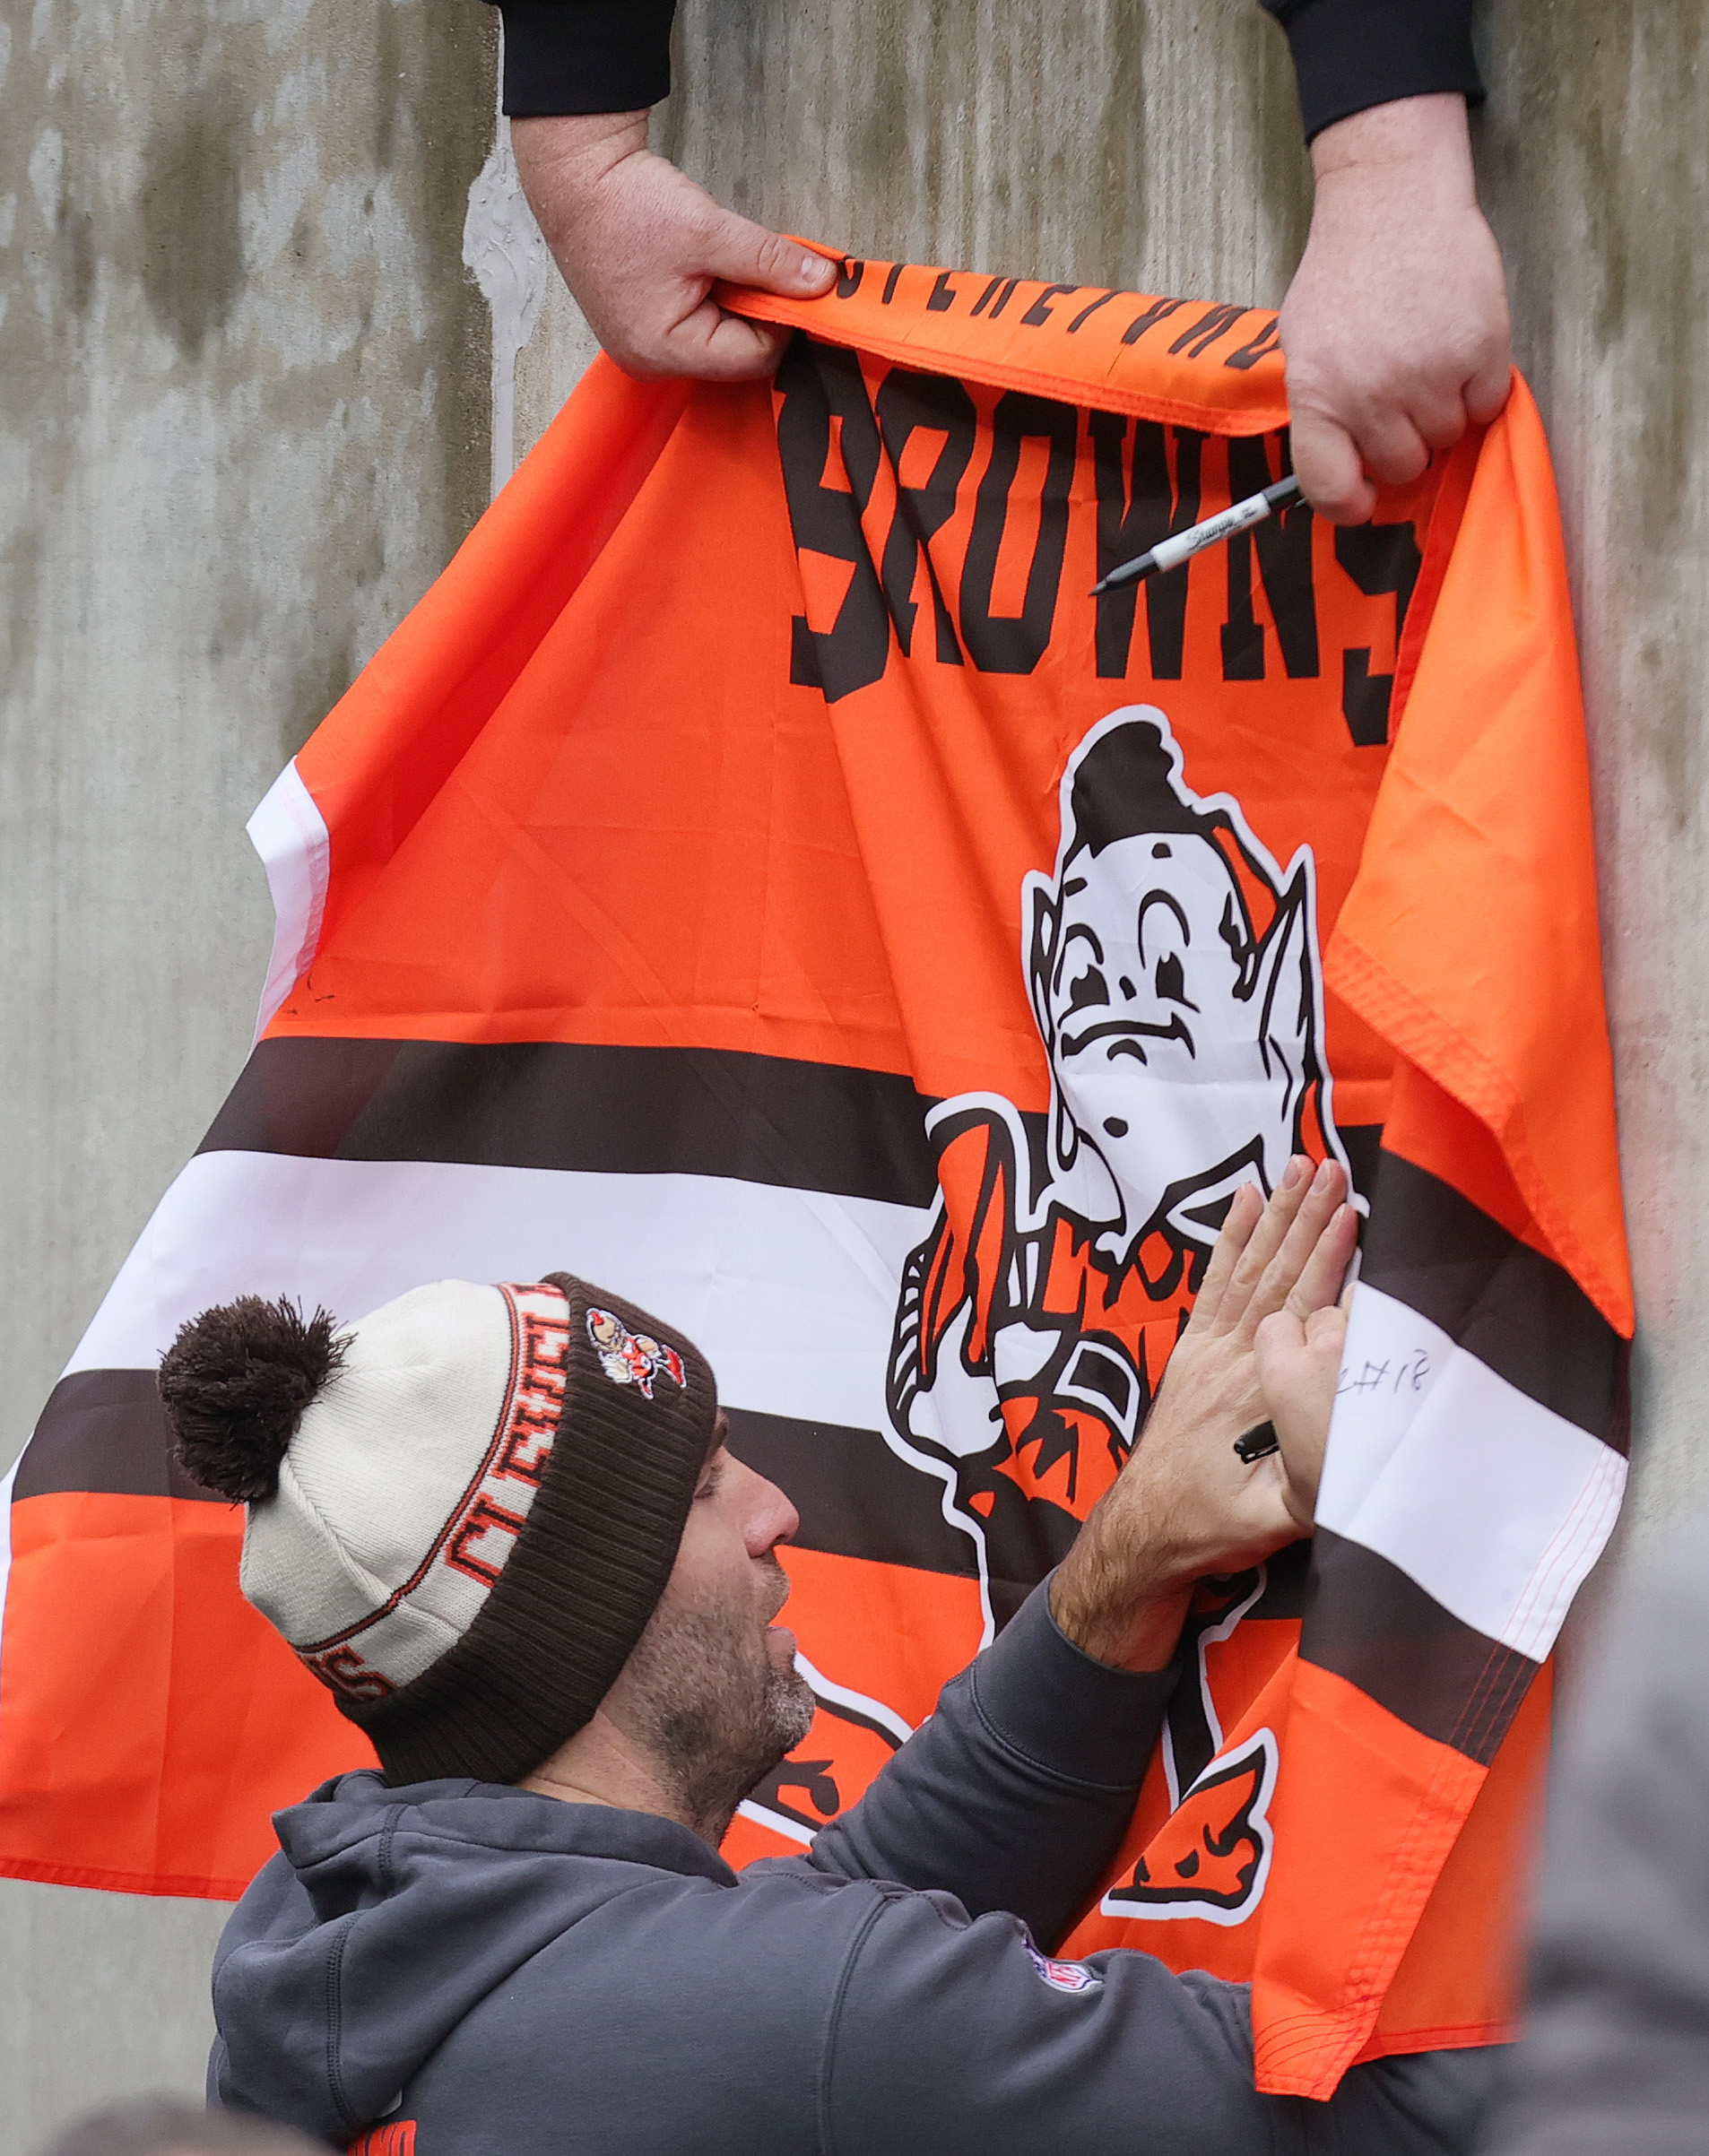 Top-rated Cleveland Browns men's apparel to sport during NFL playoffs 